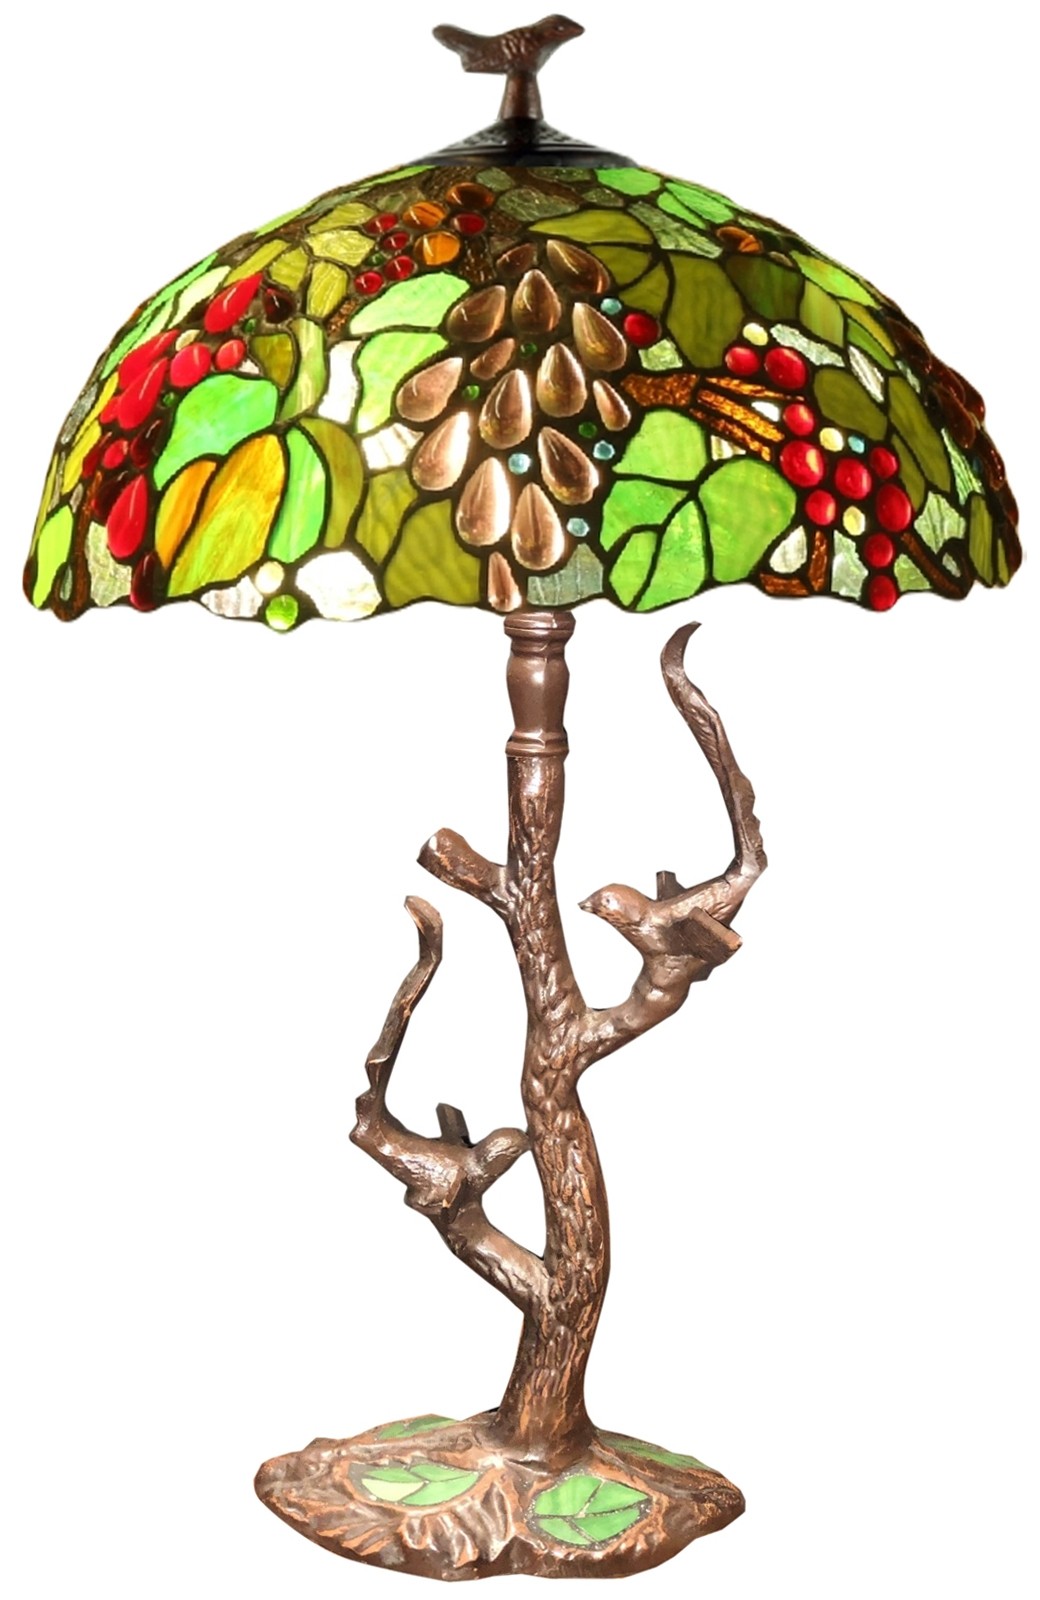 64cm Tiffany Style Grape Table Lamp With Tree / Mosaic Base 